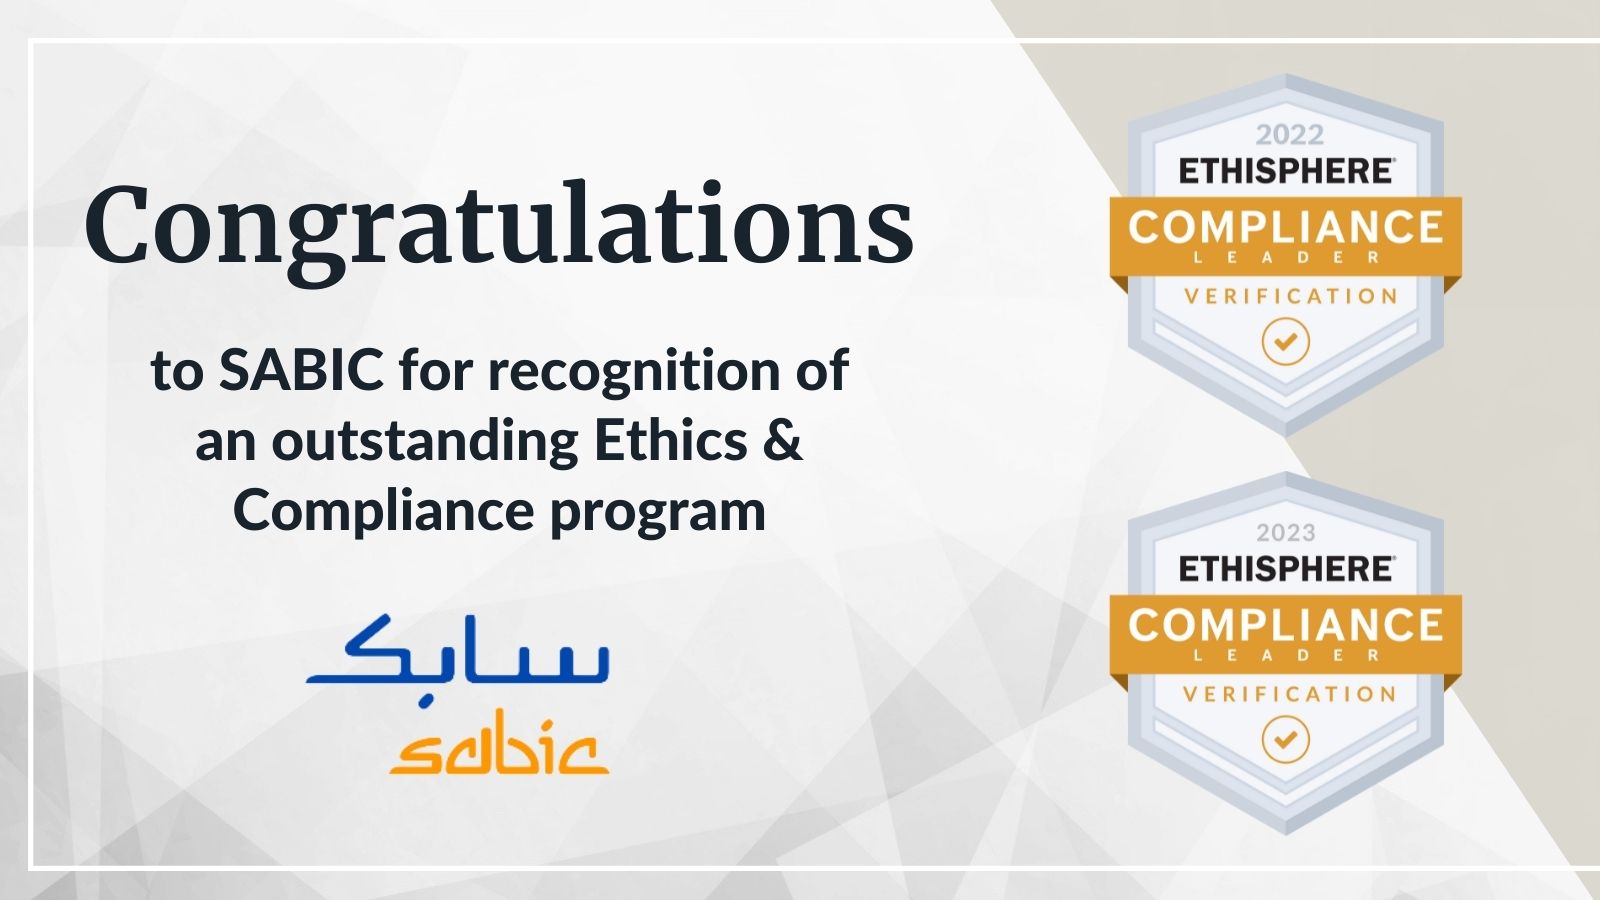 Ethisphere Recognizes SABIC with Compliance Leader Verification™